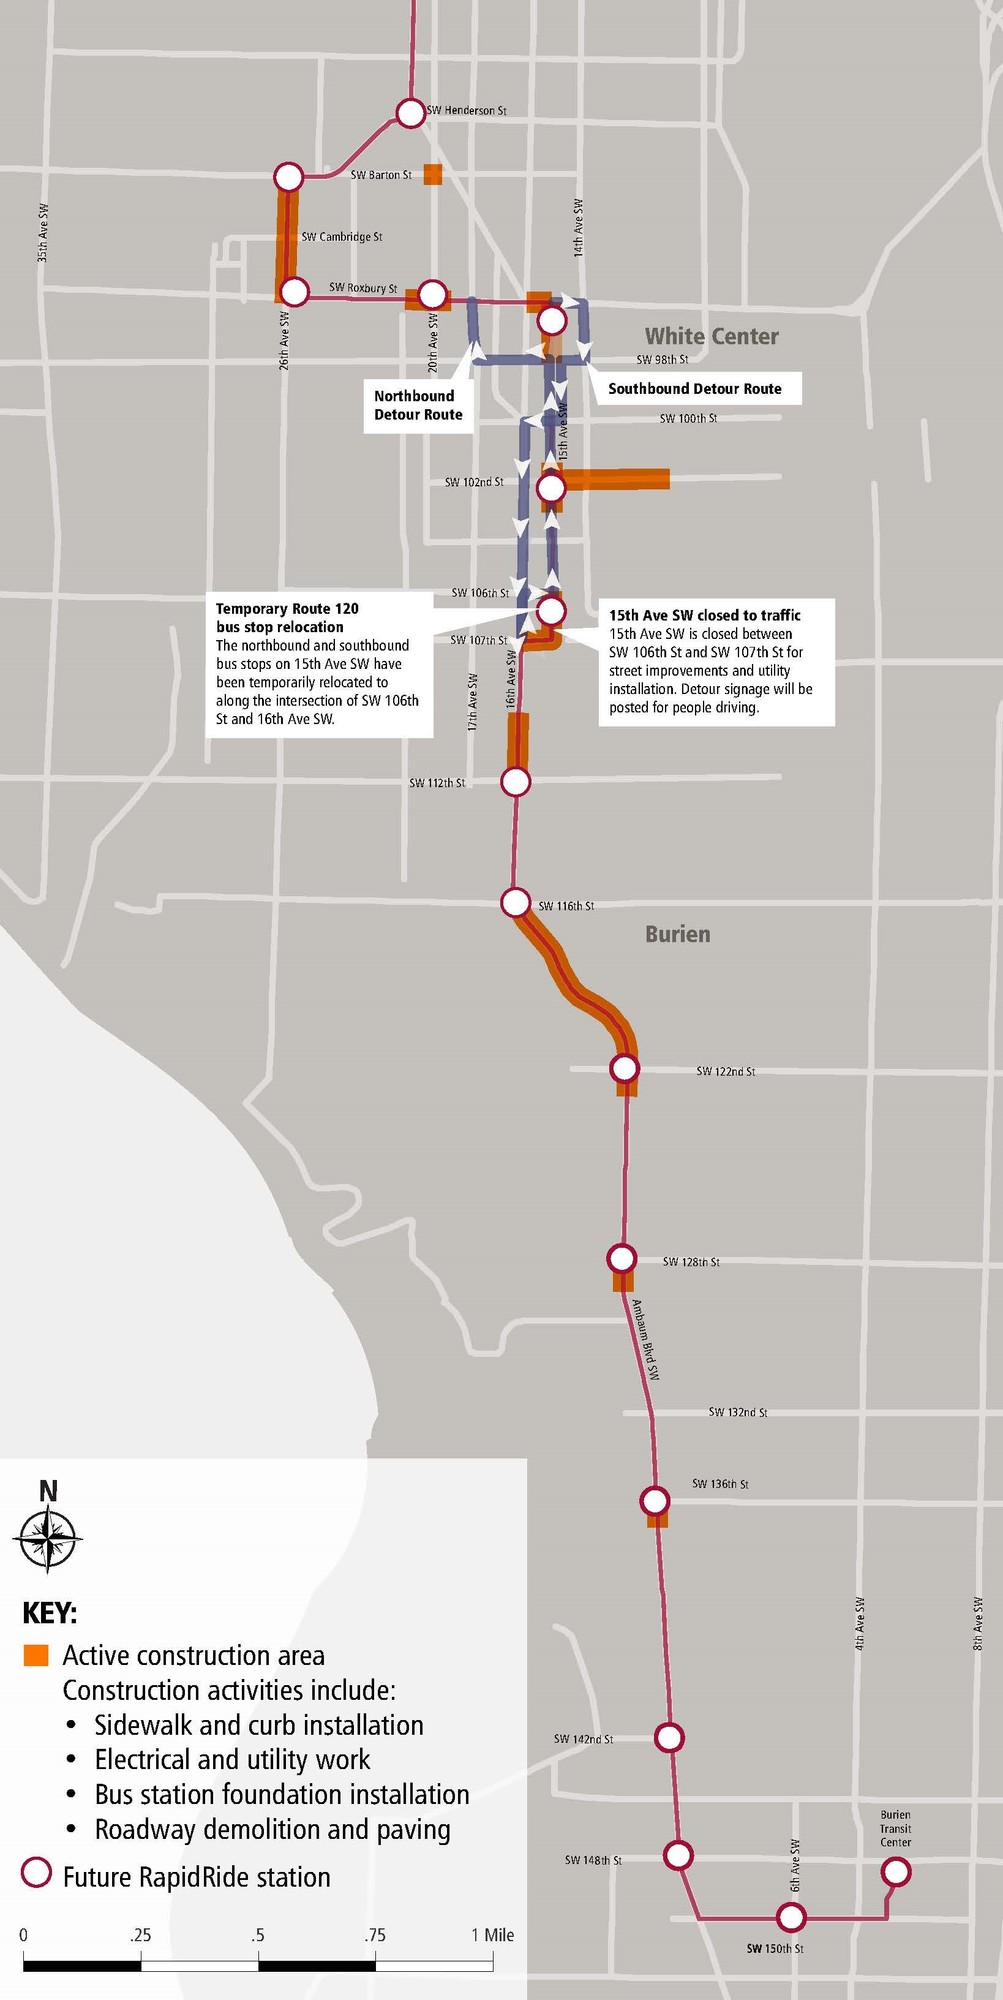 Map of active RapidRide H Line construction zones, including future RapidRide route and stations, road closures and detours, and bus stop relocations.